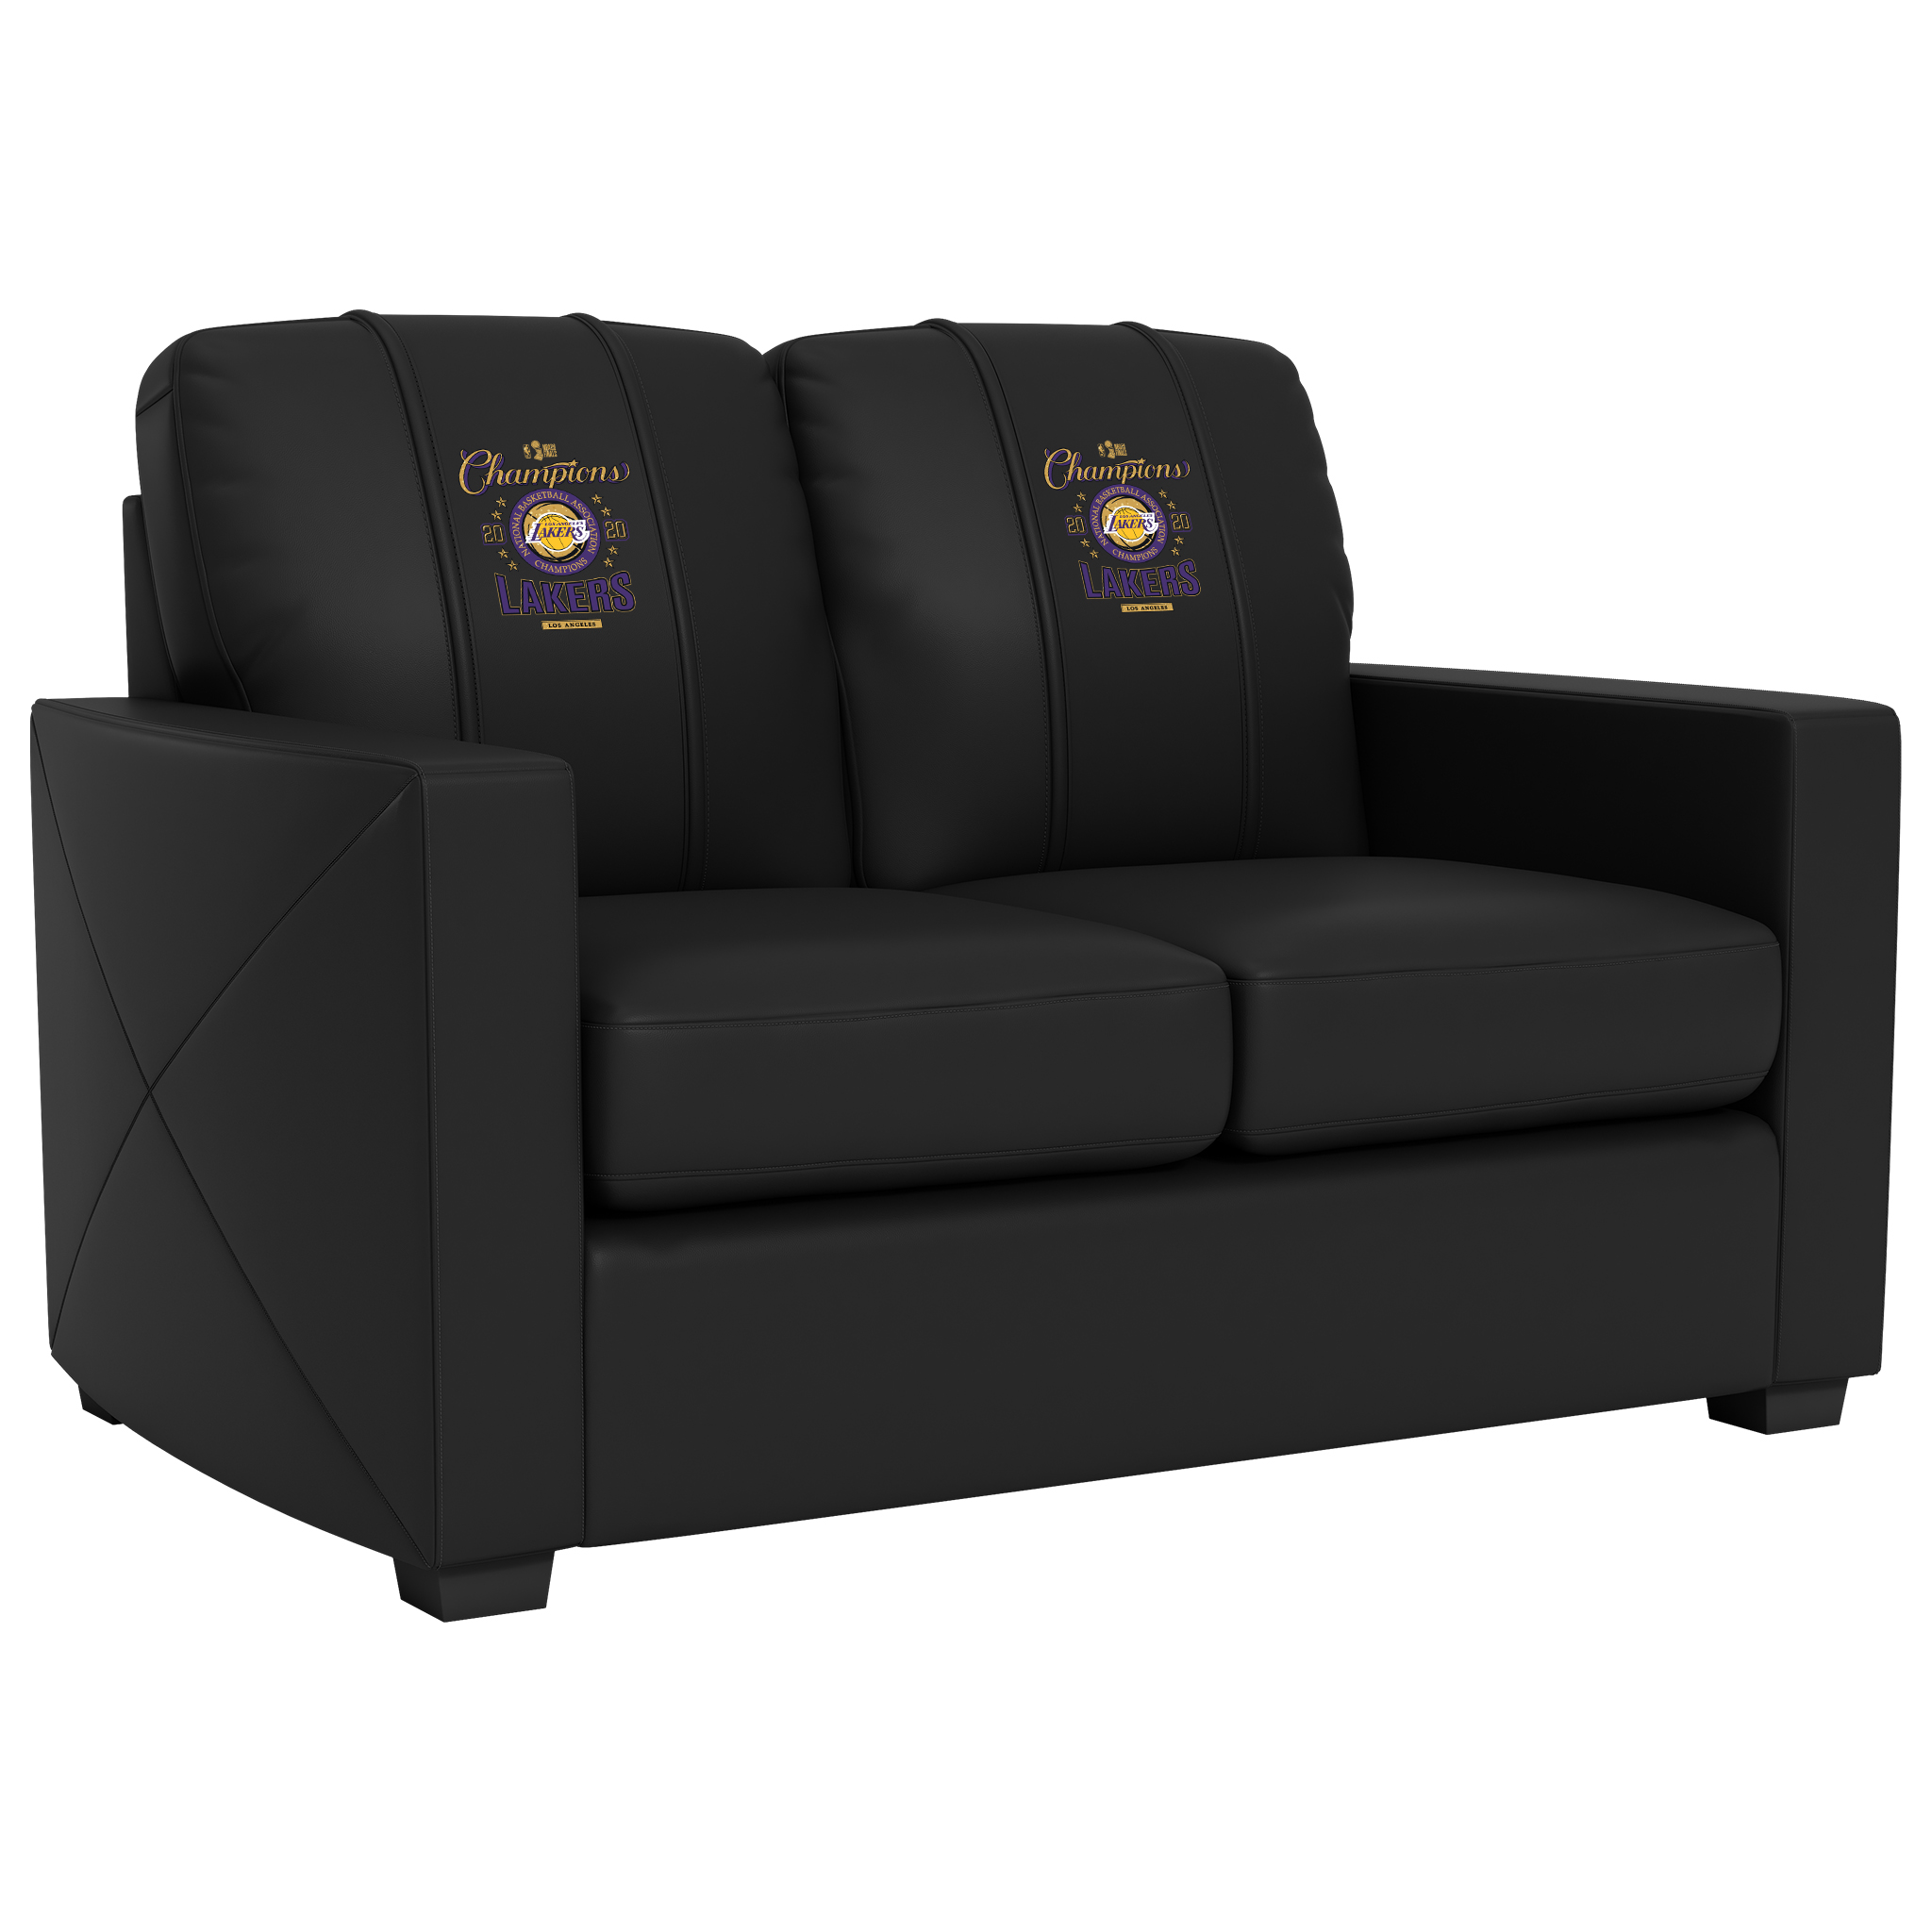 Los Angeles Lakers  Silver Loveseat with Los Angeles Lakers 2020 Champions Logo